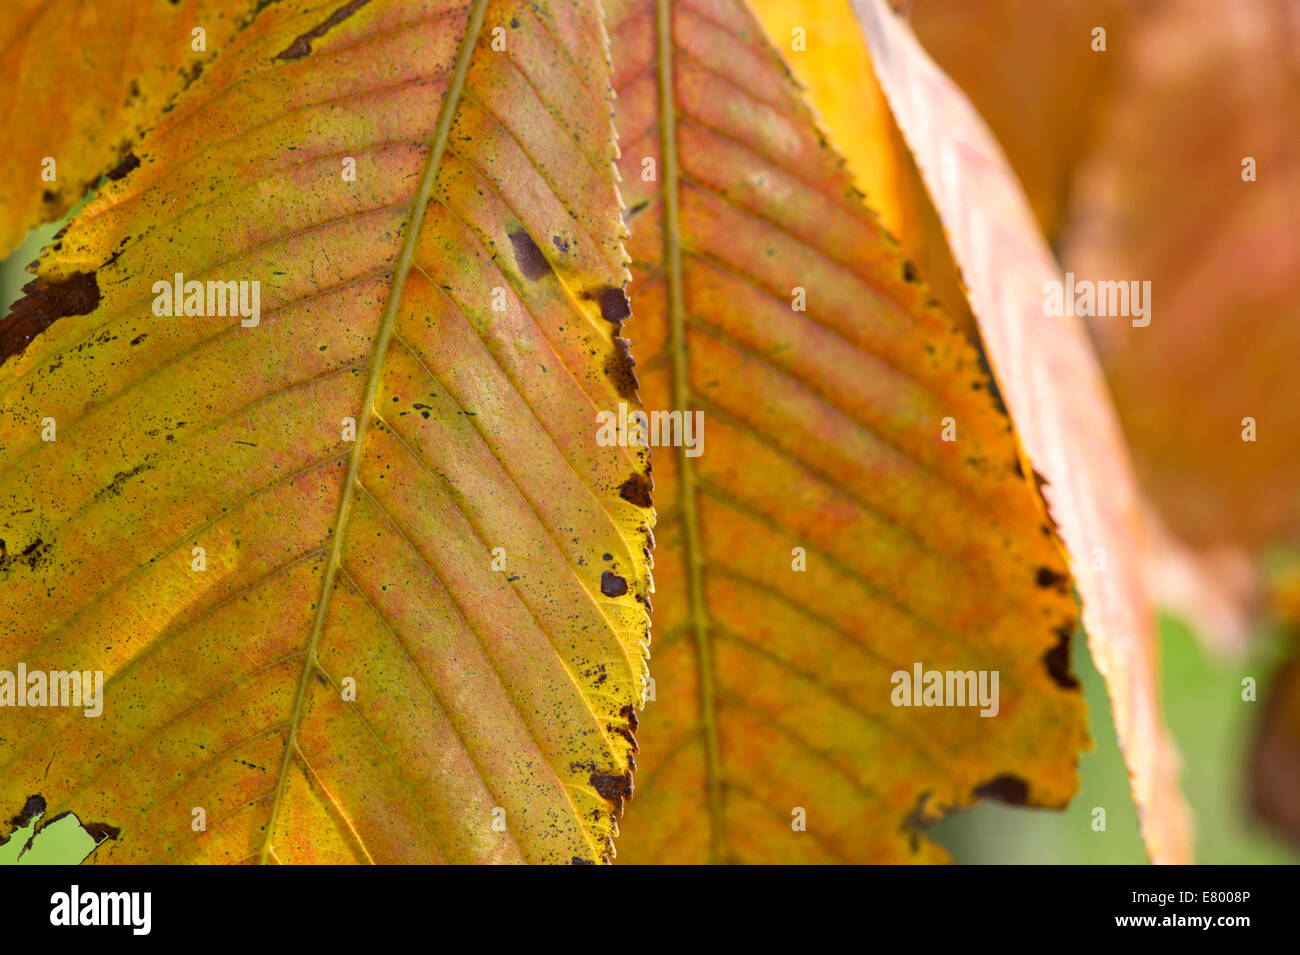 Aesculus Turbinata. Japanese horse chestnut tree leaves in autumn changing colour Stock Photo